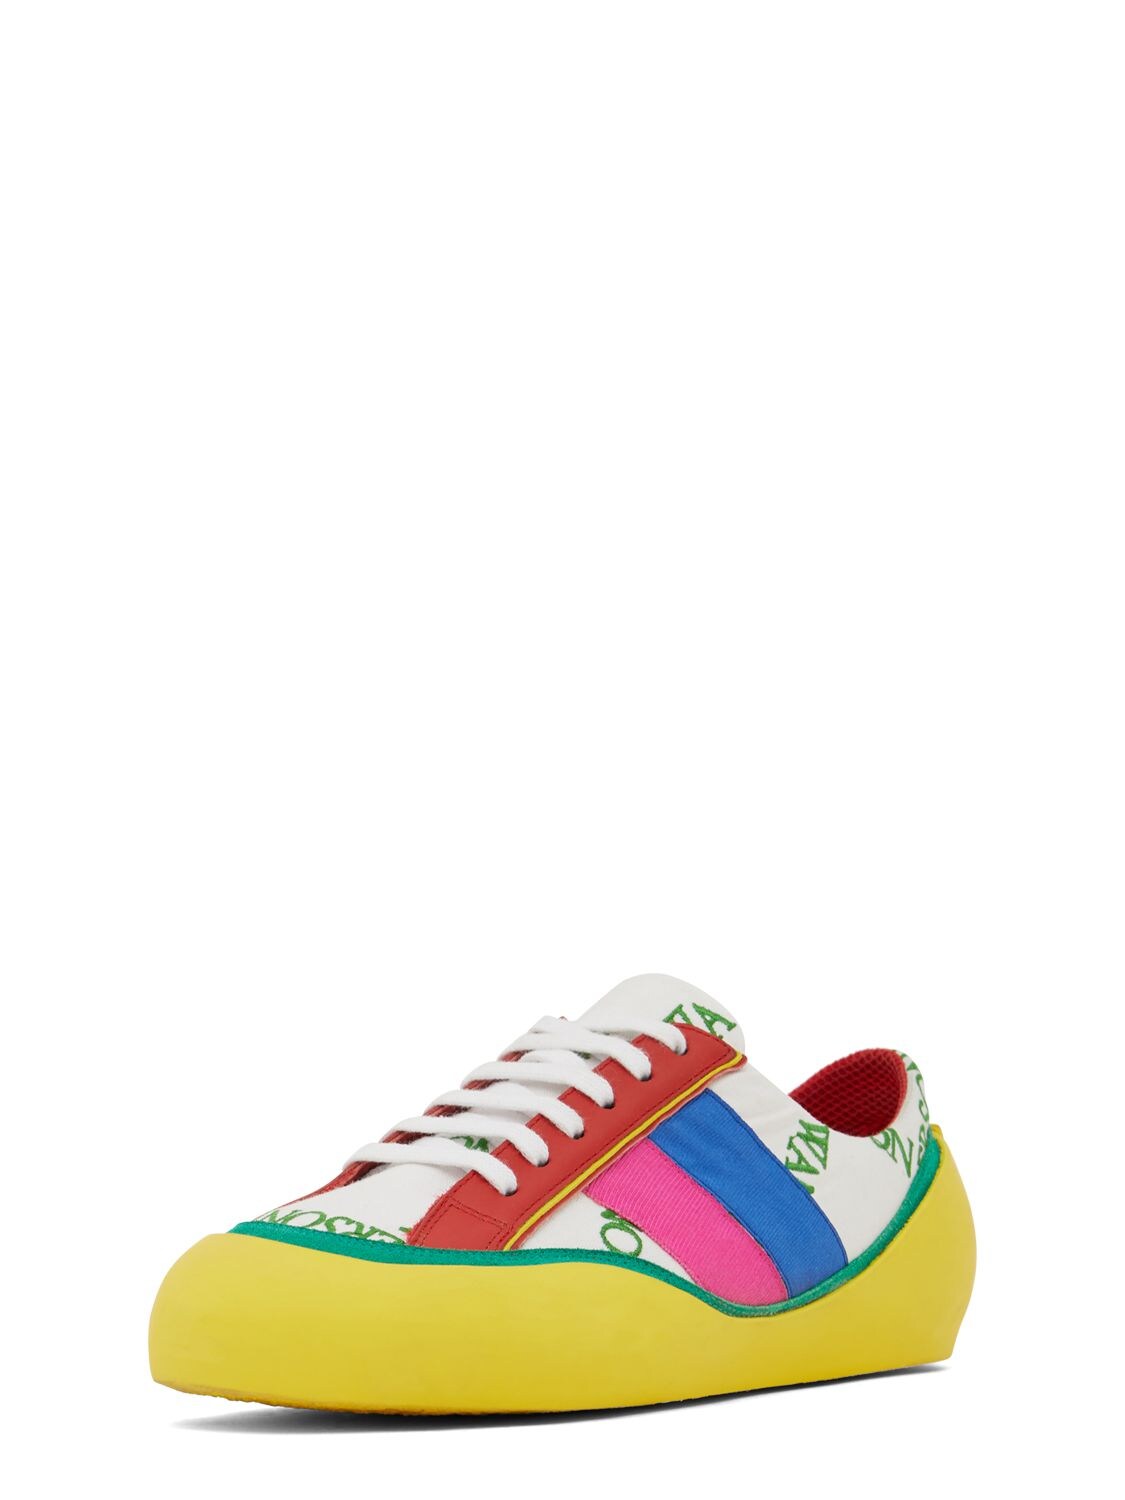 JW ANDERSON 10MM BUBBLE LEATHER & CANVAS SNEAKERS 